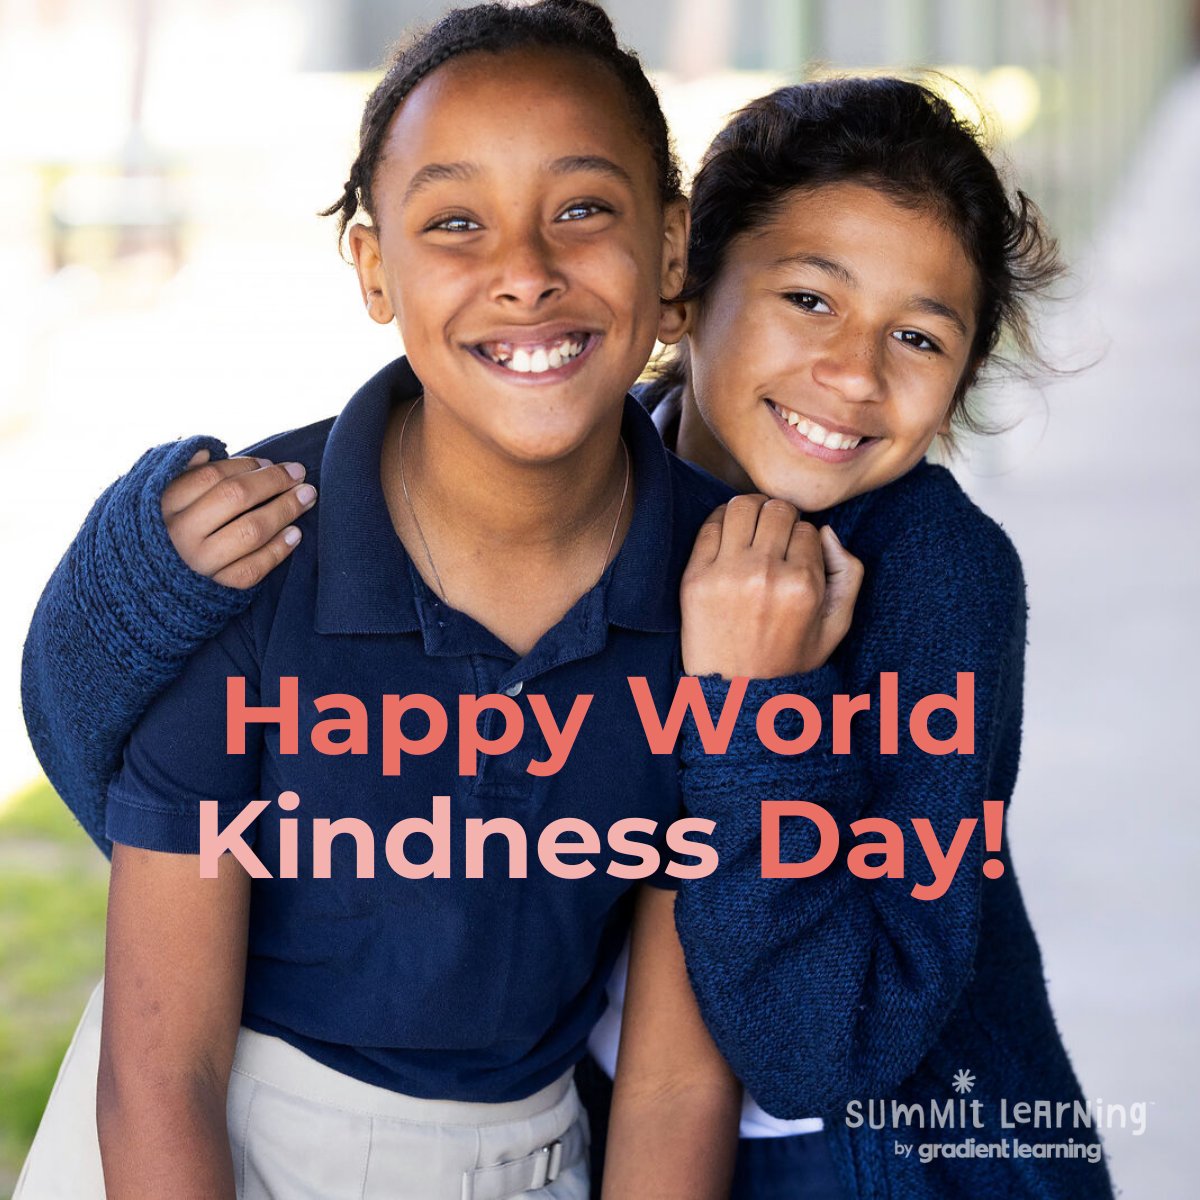 Happy #WorldKindnessDay! School’s purpose is greater than reading, writing and arithmetic. One act of kindness can make a difference in a student's life both in and out of the classroom.❤️